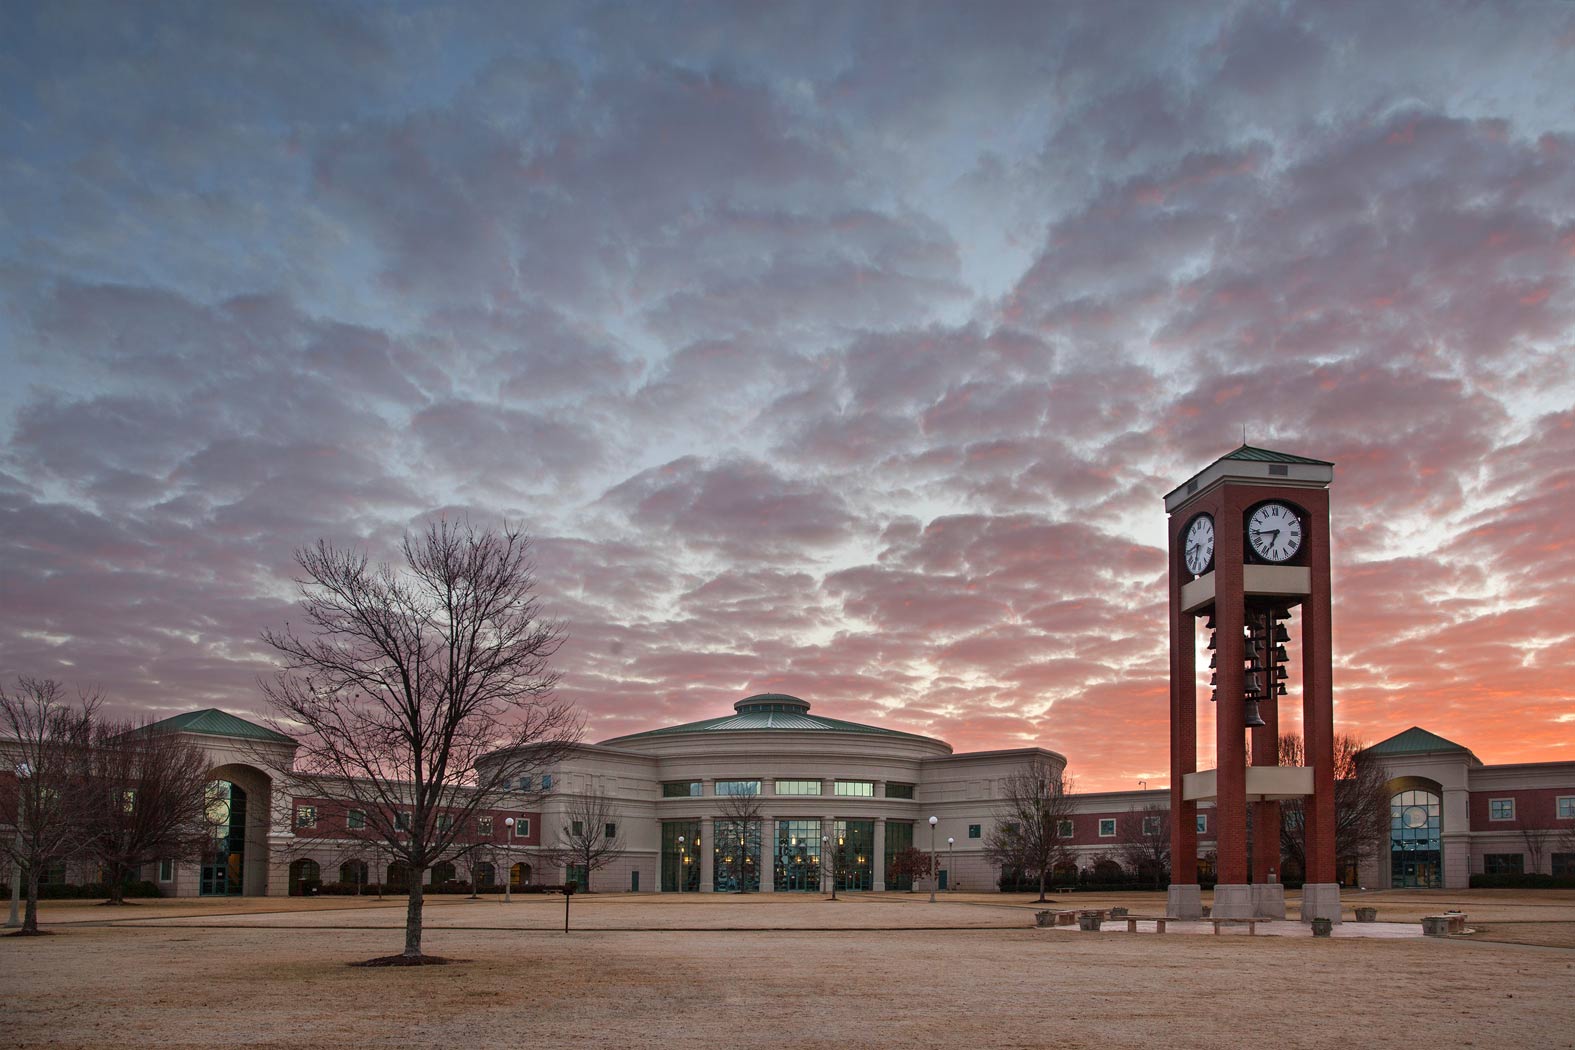 Shelton State building and clocktower at sunset